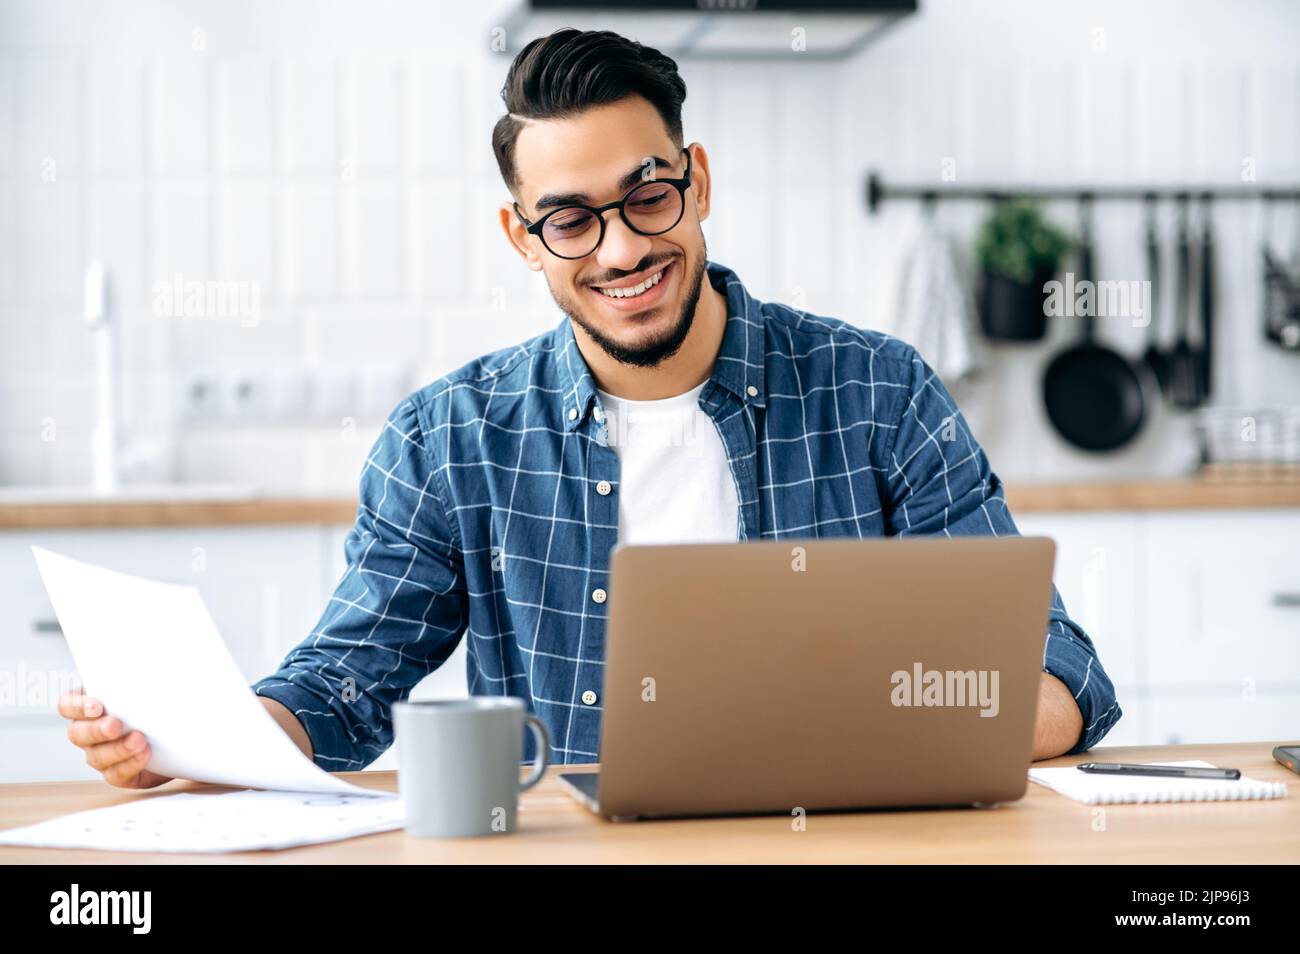 Work from home. Smart arabian or indian stylish man, freelancer, programmer, manager, working remotely, sit at a desk at home in the kitchen, working on a project uses laptop, studying documents,smile Stock Photo